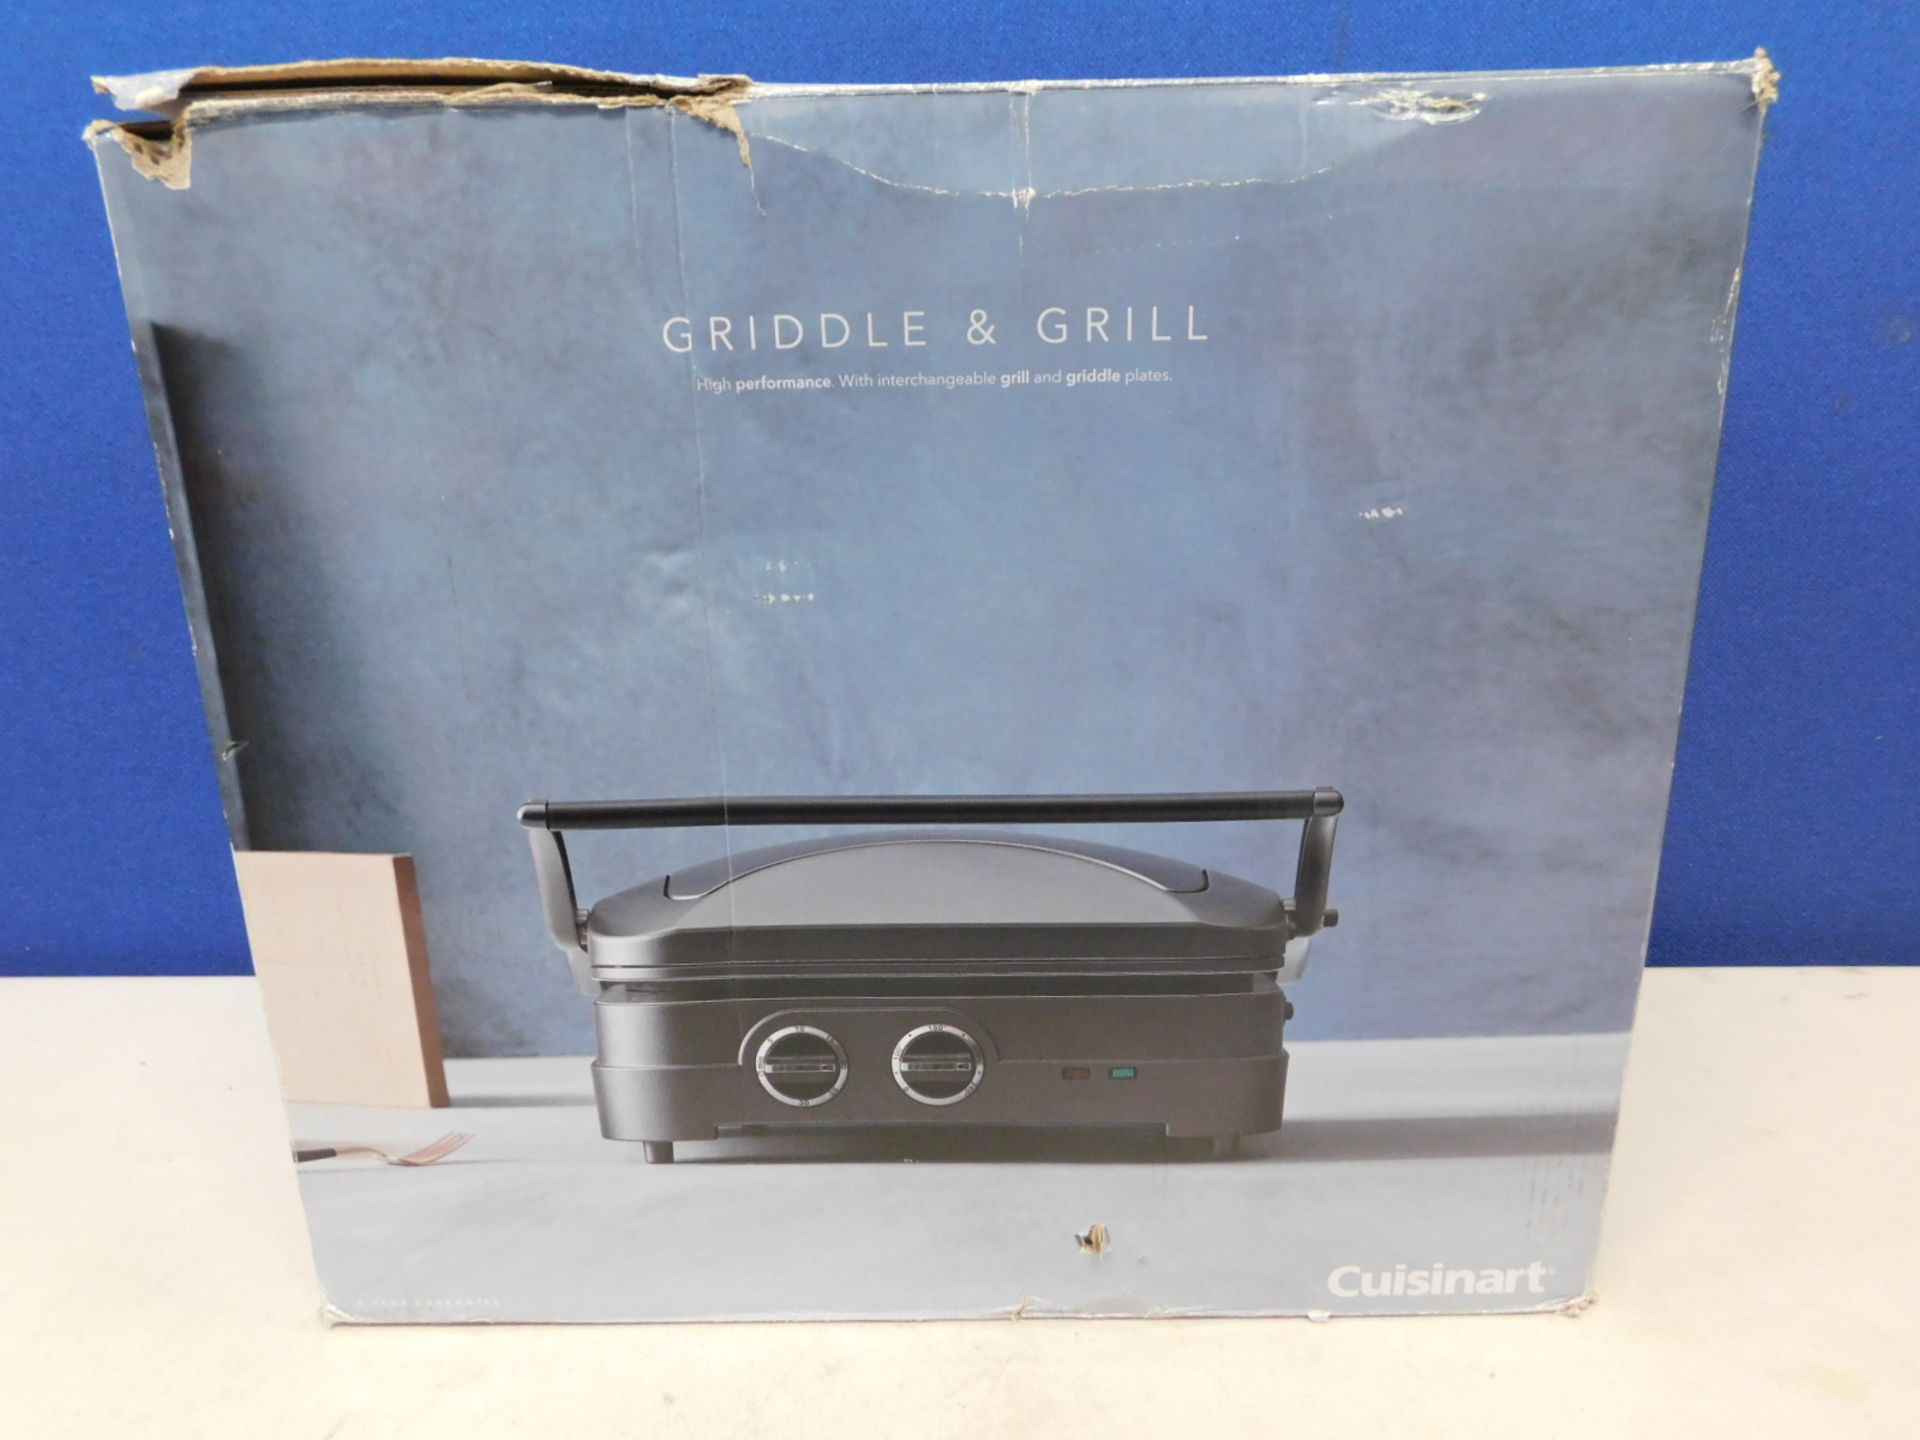 1 BOXED CUISINART GR47BU STAINLESS STEEL GRIDDLE & GRILL RRP Â£149